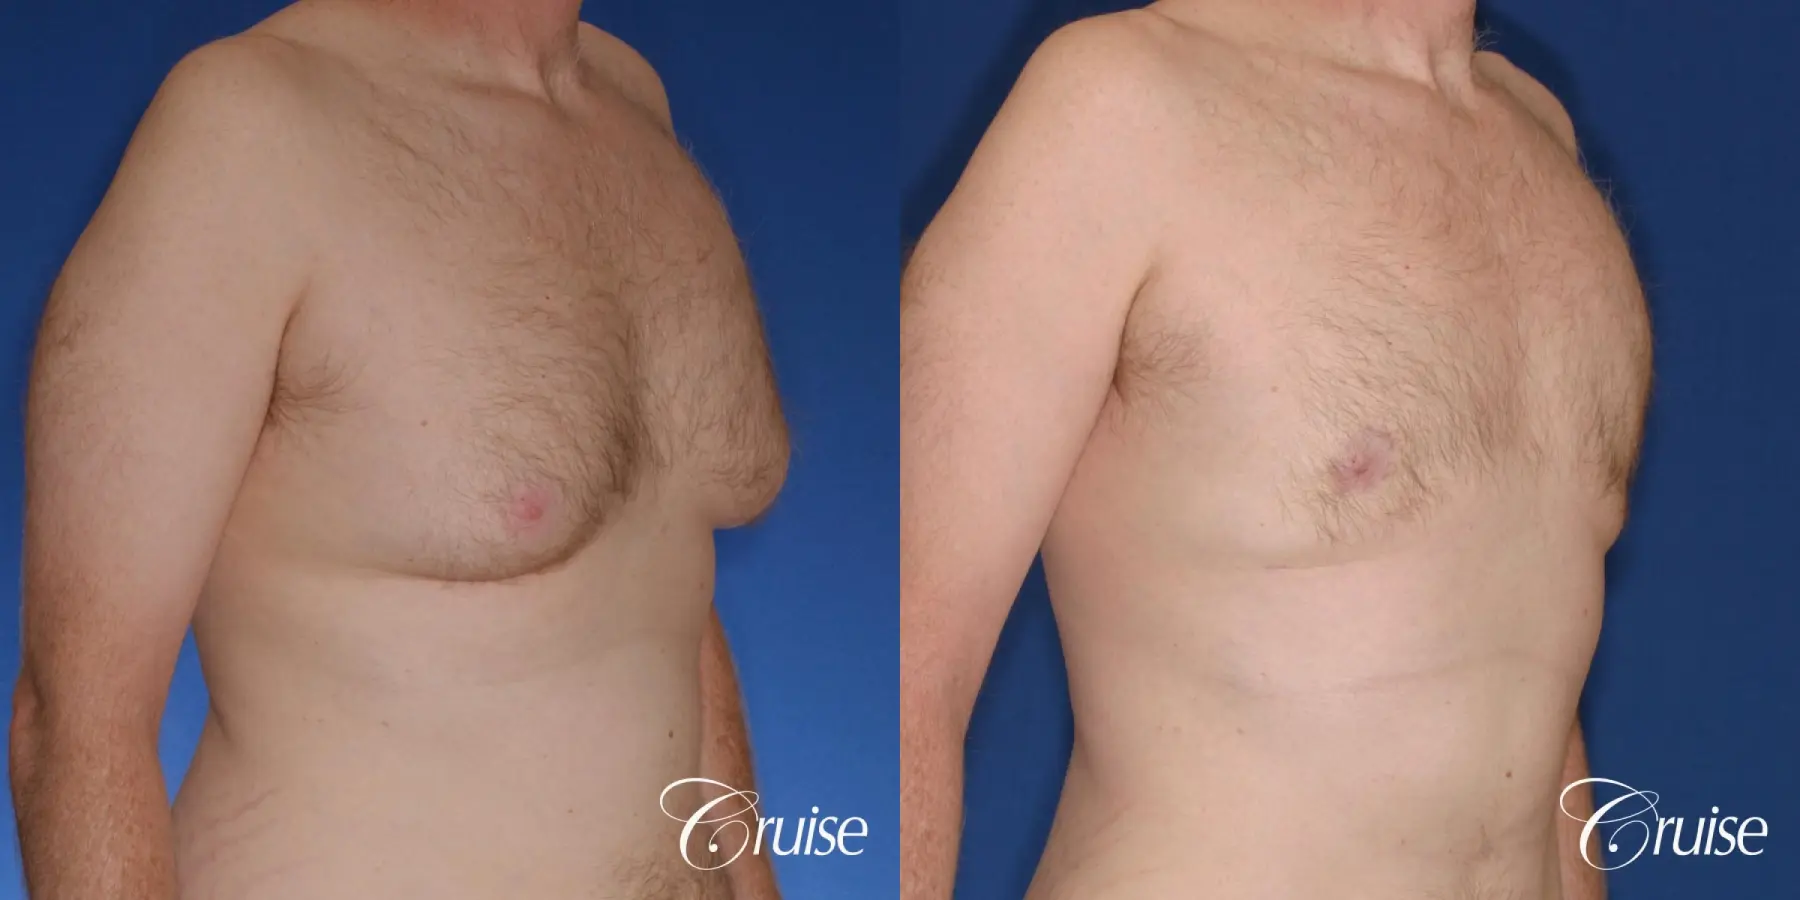 best donut lift with gynecomastia surgery - Before and After 4